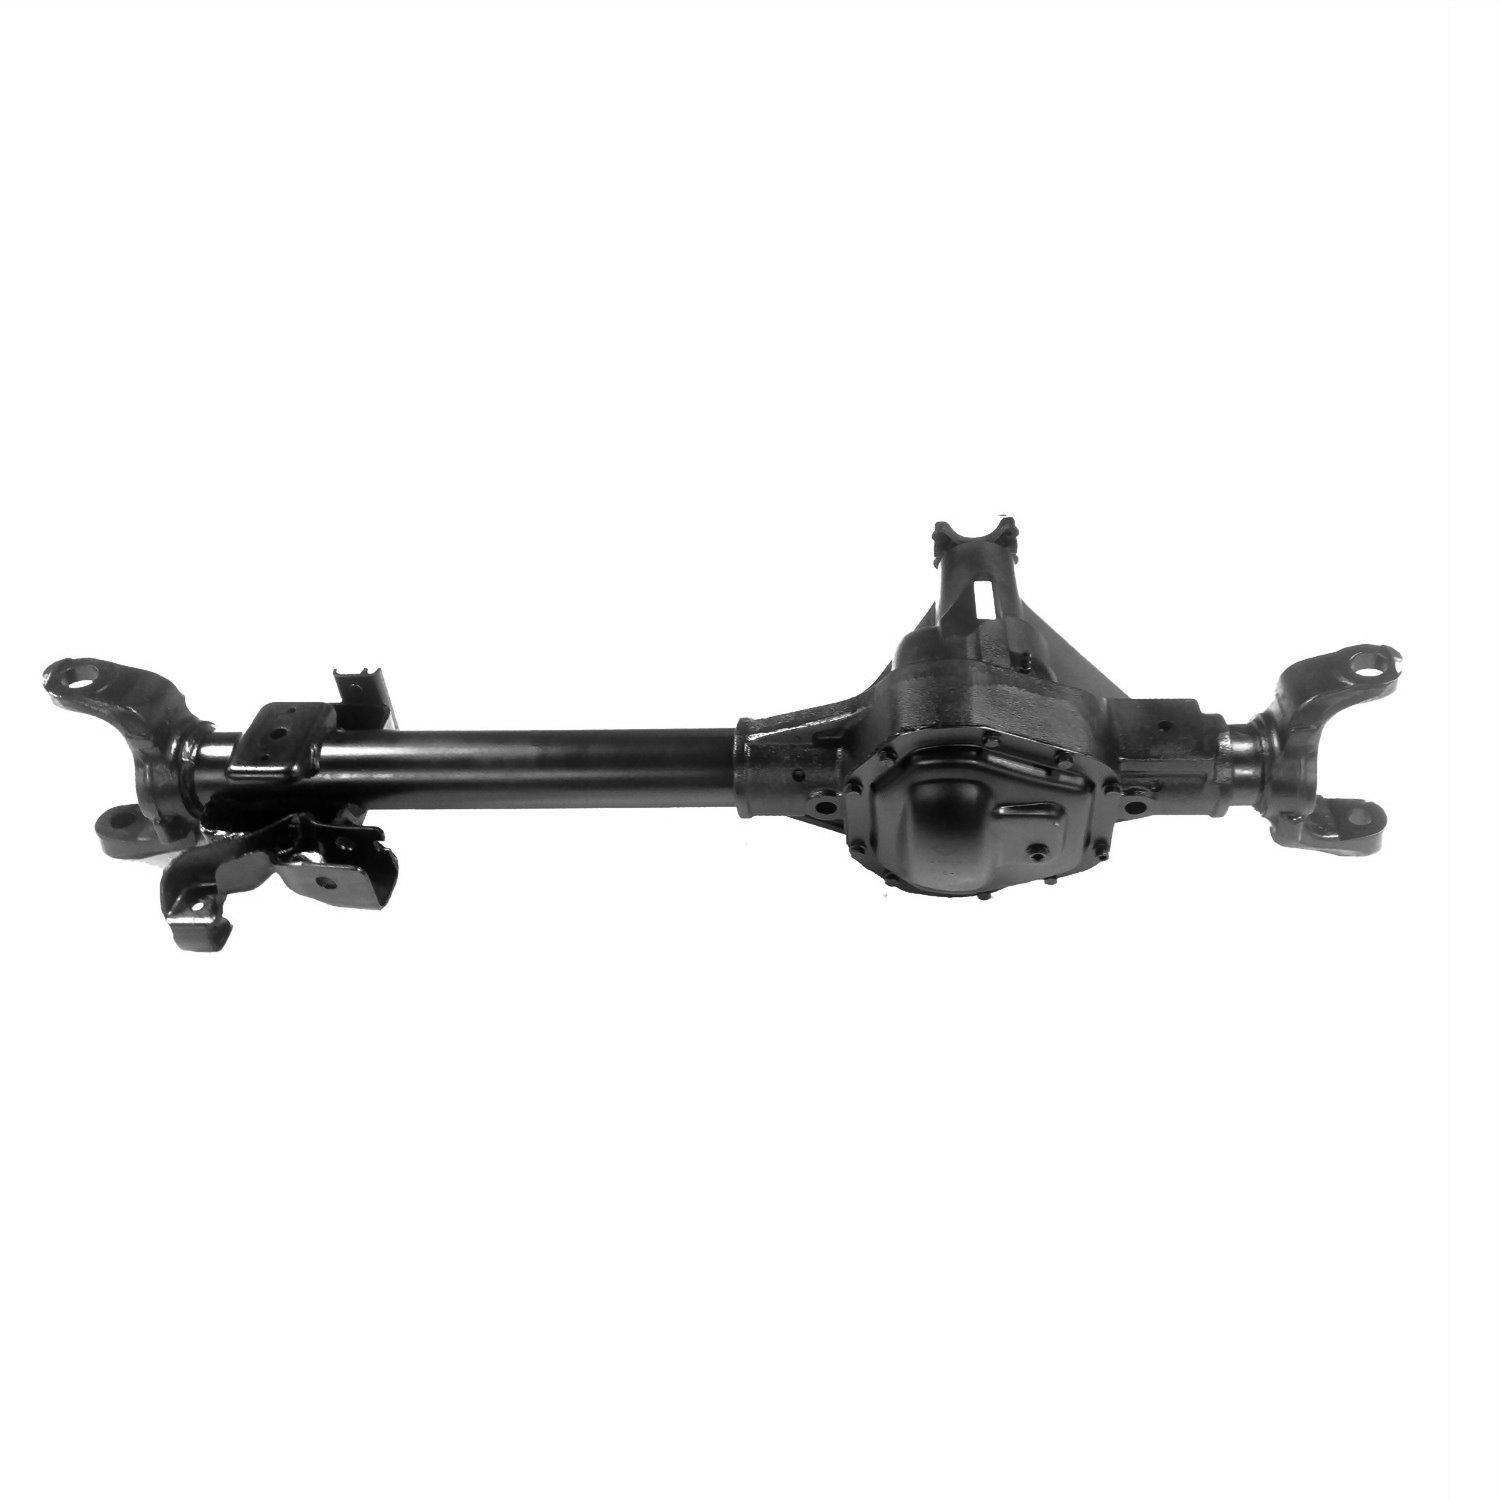 Remanufactured Complete Axle Assembly for Dana 60 1999 Ford F351 3.73 Ratio, DRW